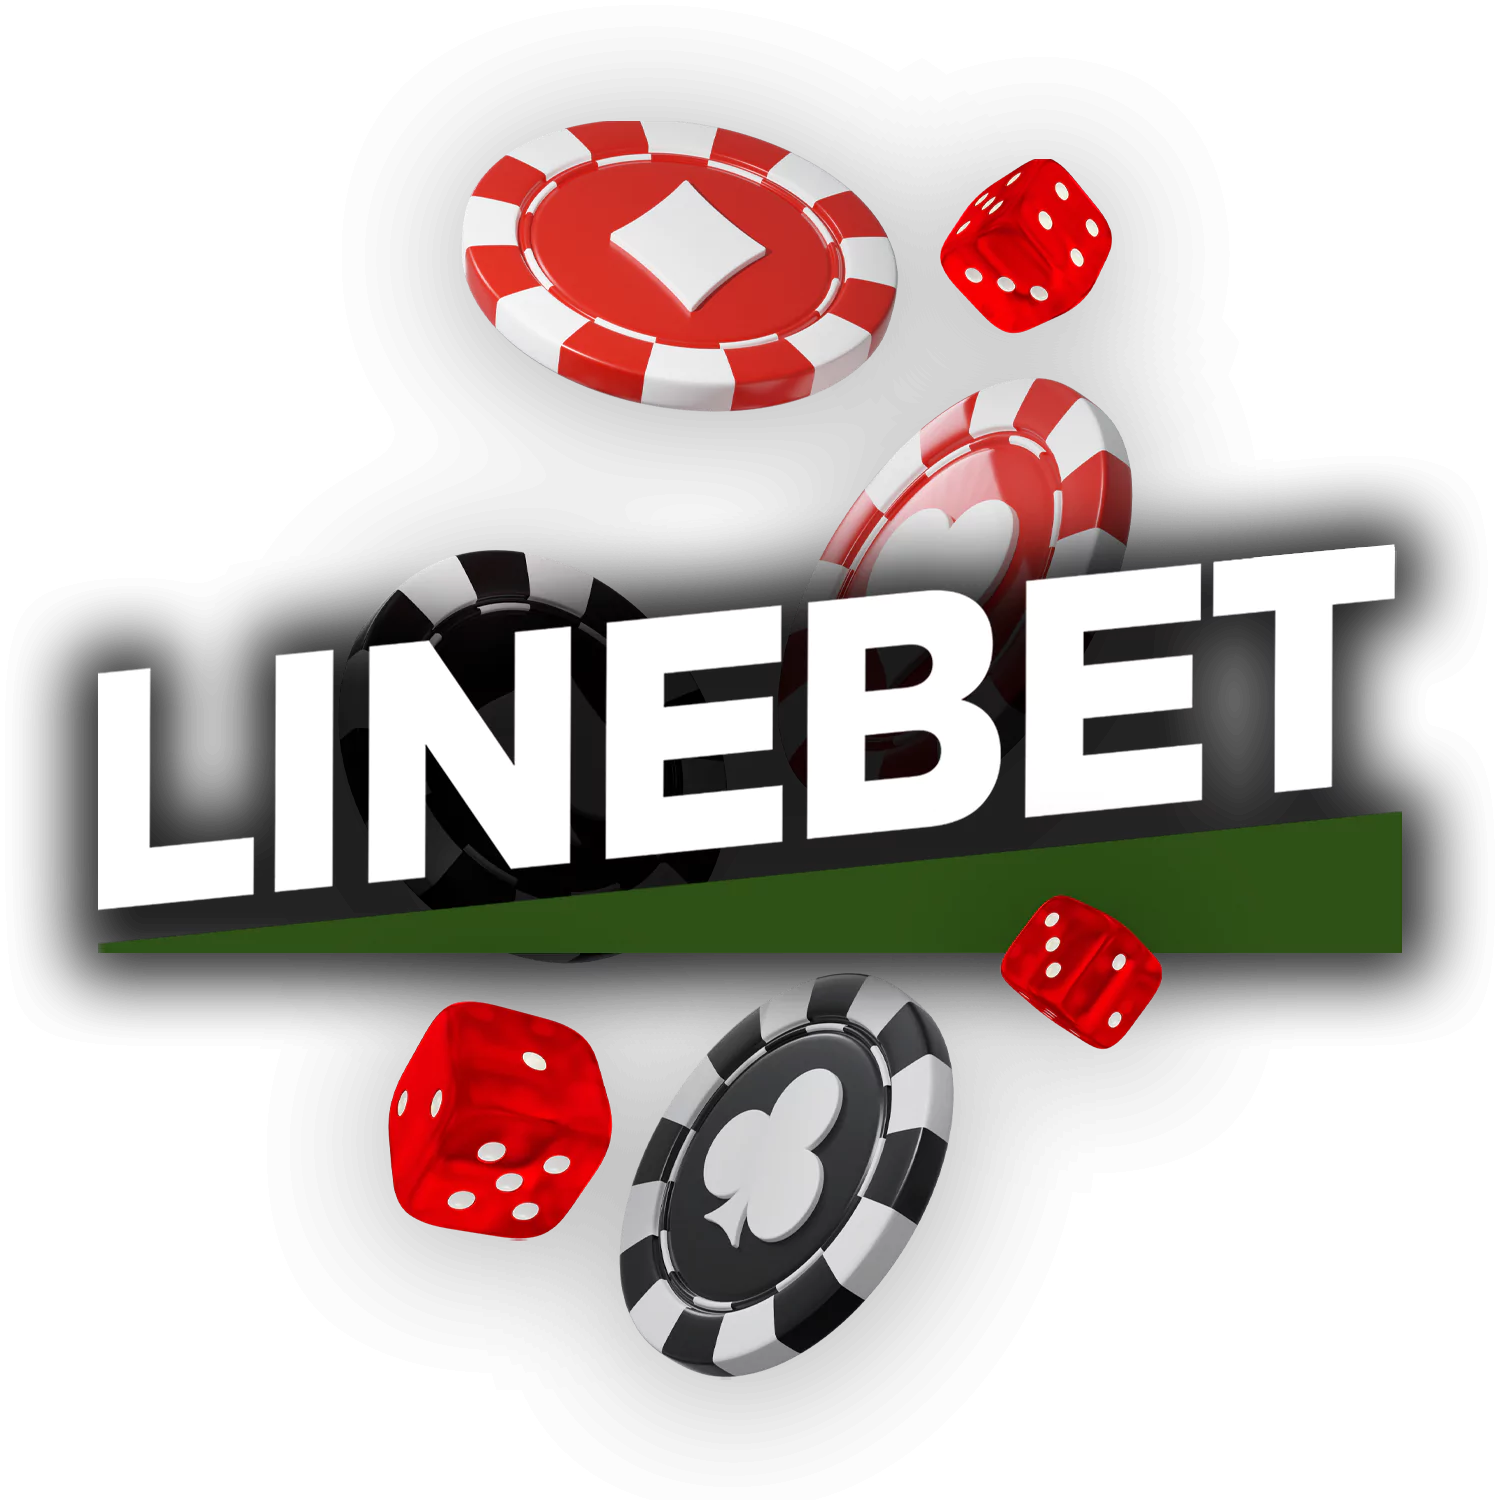 Learn how to play the game of baccarat in the Linebet Casino.